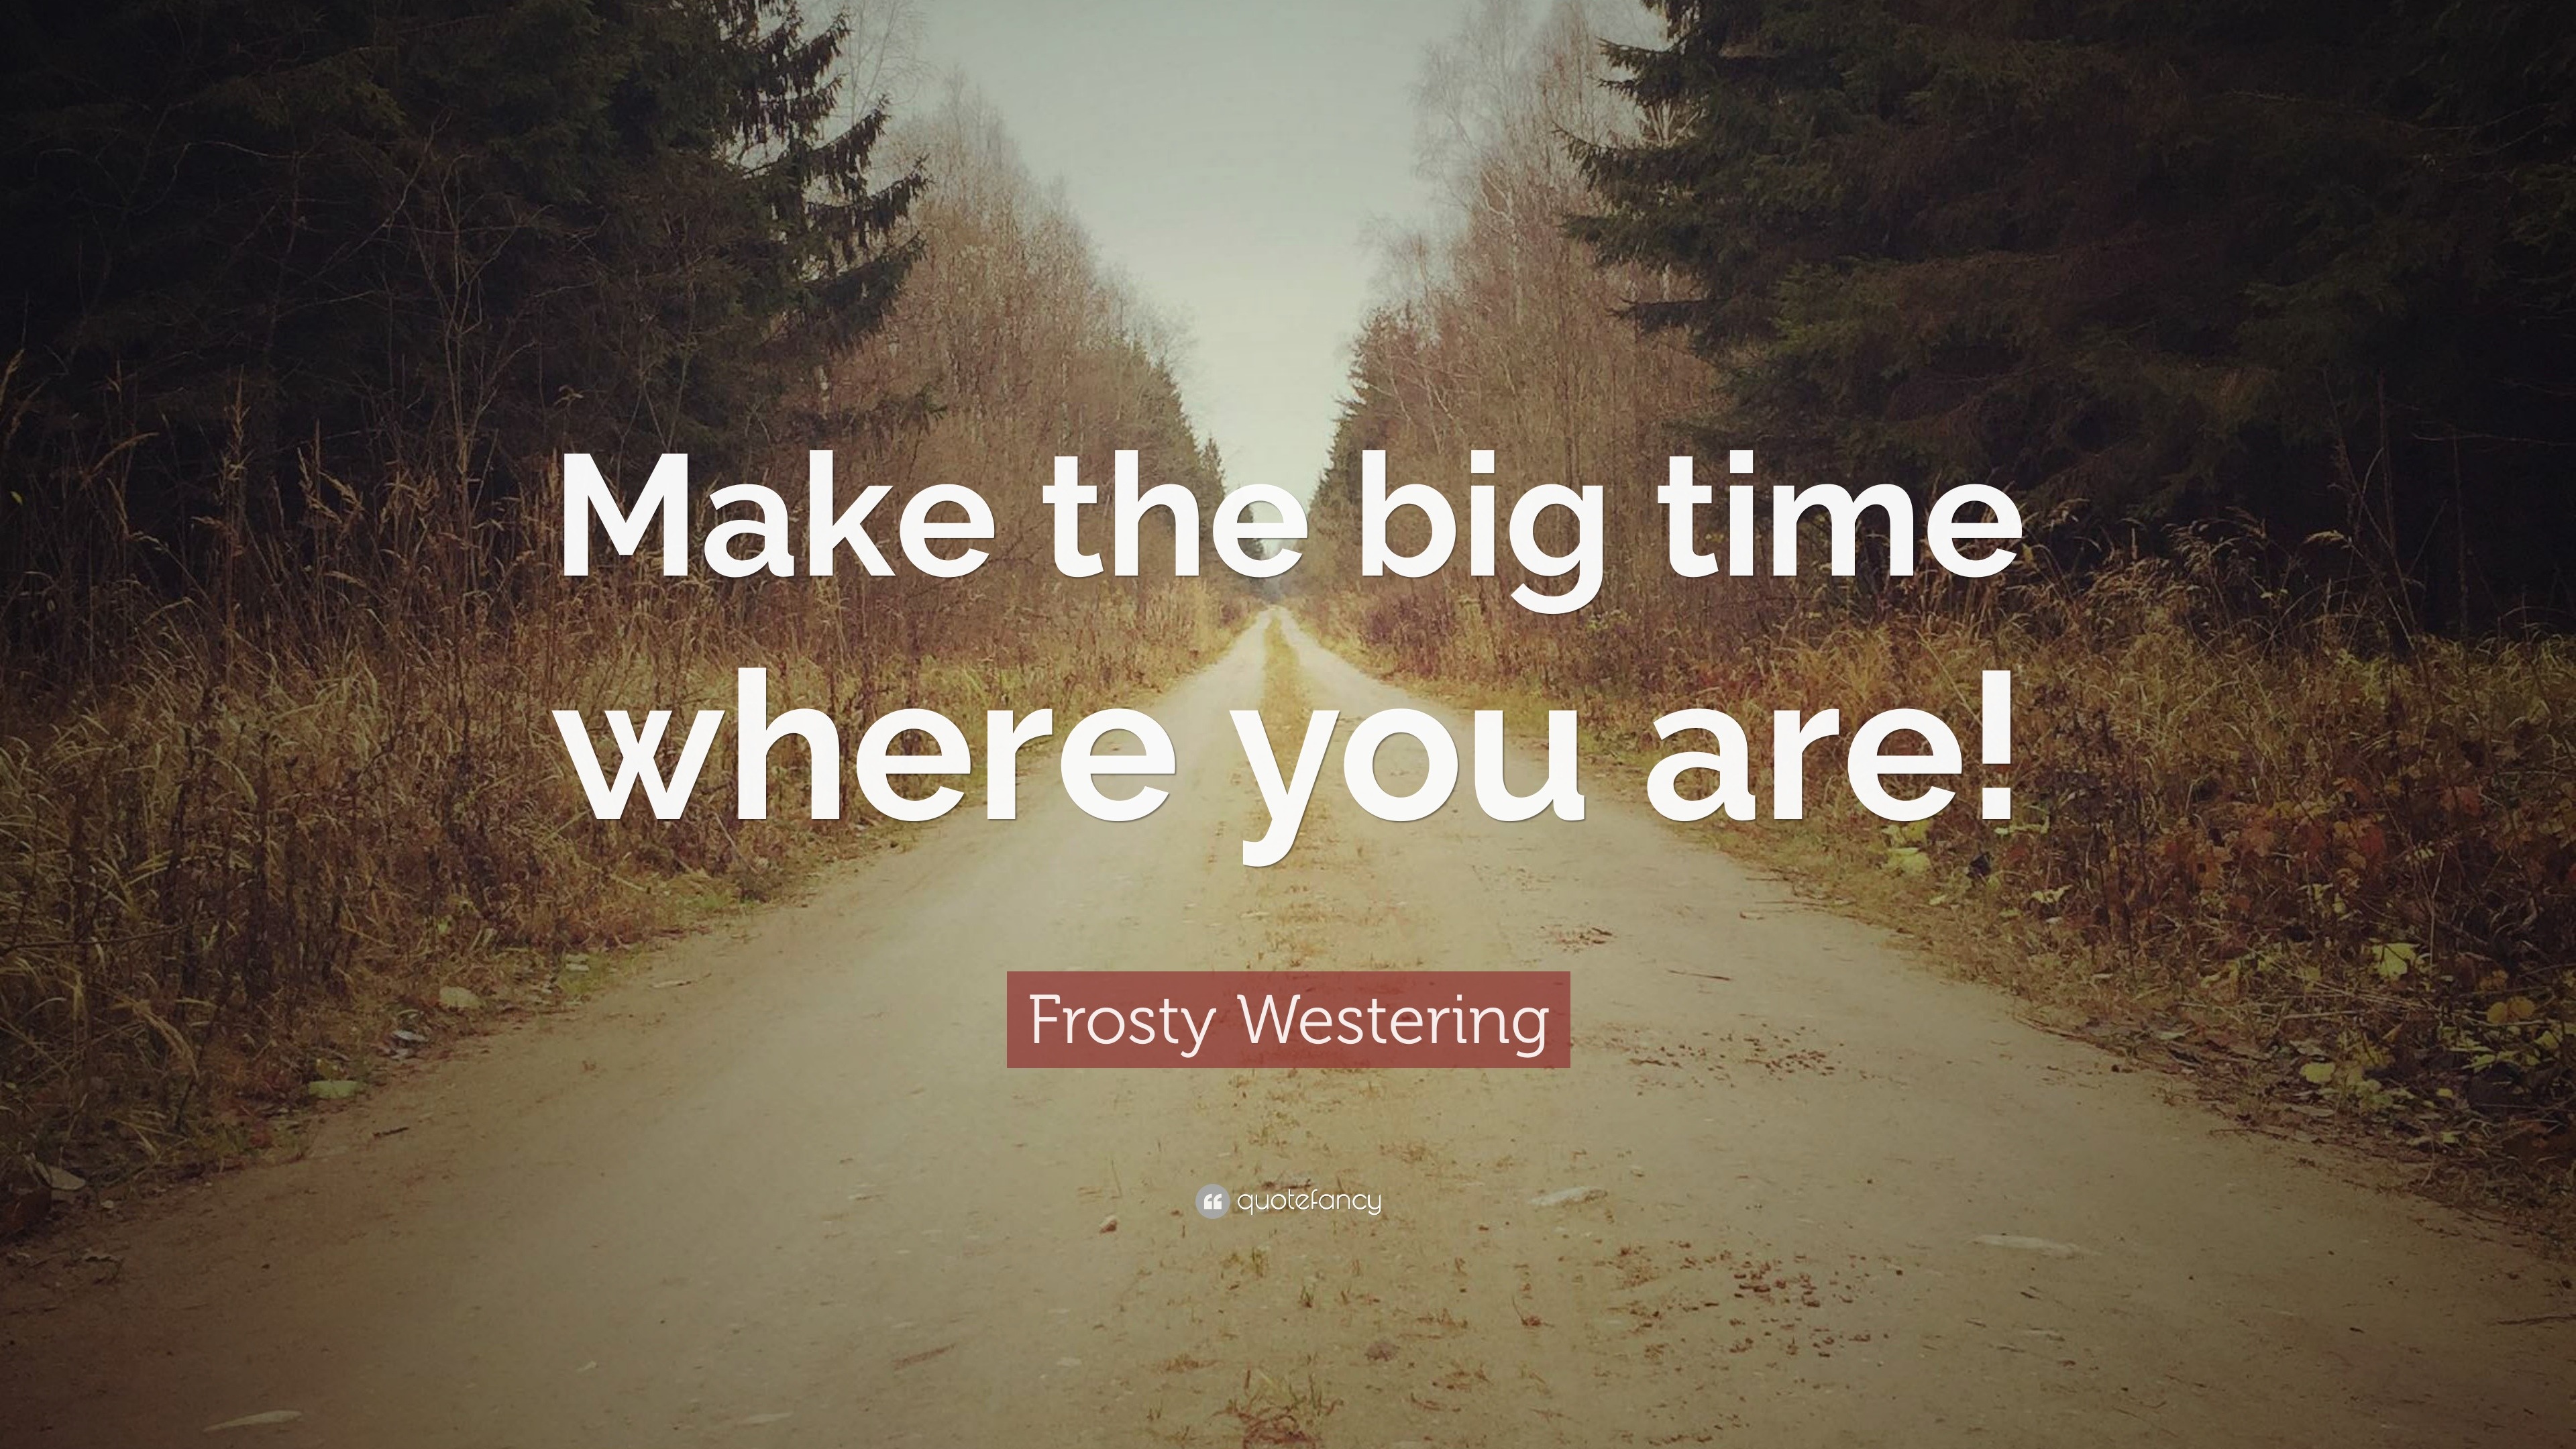 Frosty Westering Quotes (6 wallpapers) - Quotefancy